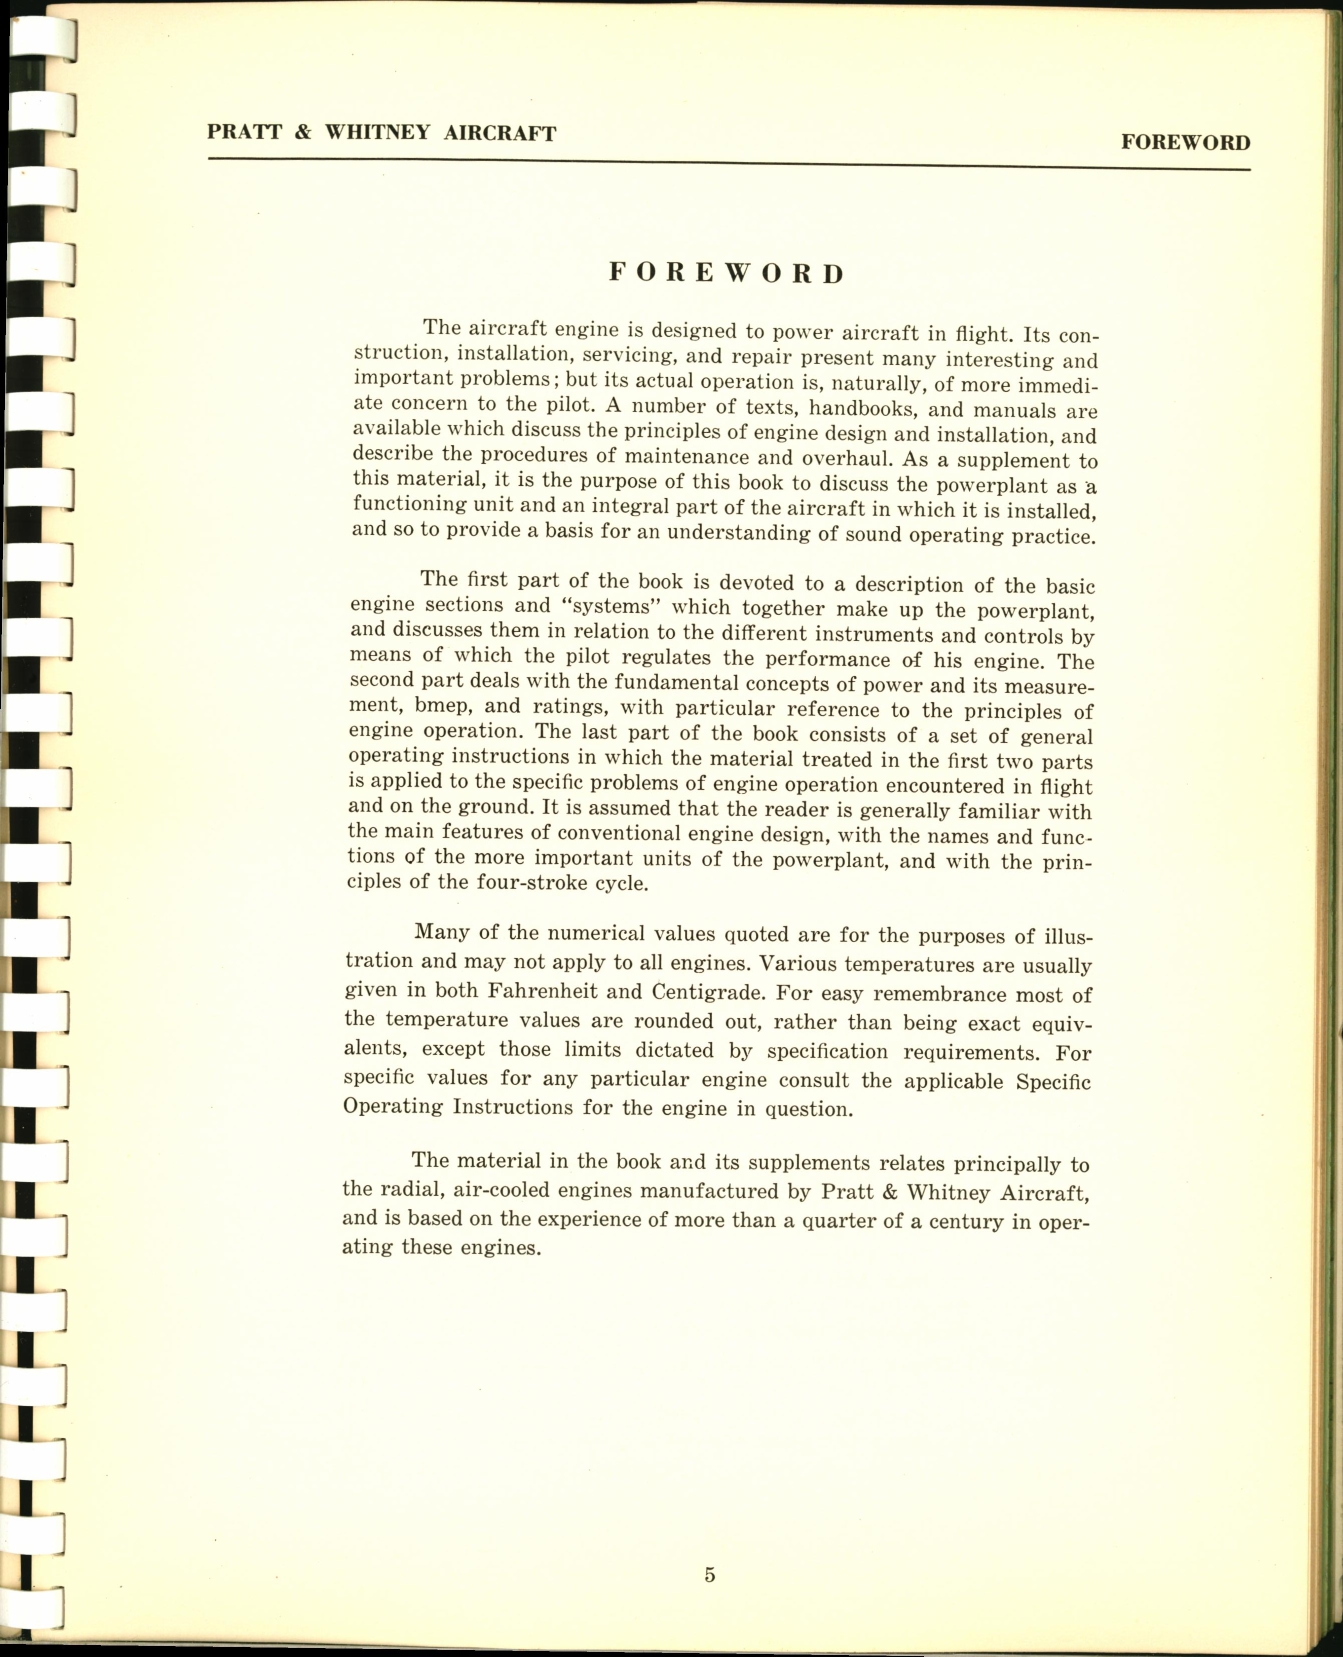 Sample page 6 from AirCorps Library document: The Aircraft Engine and Its Operation